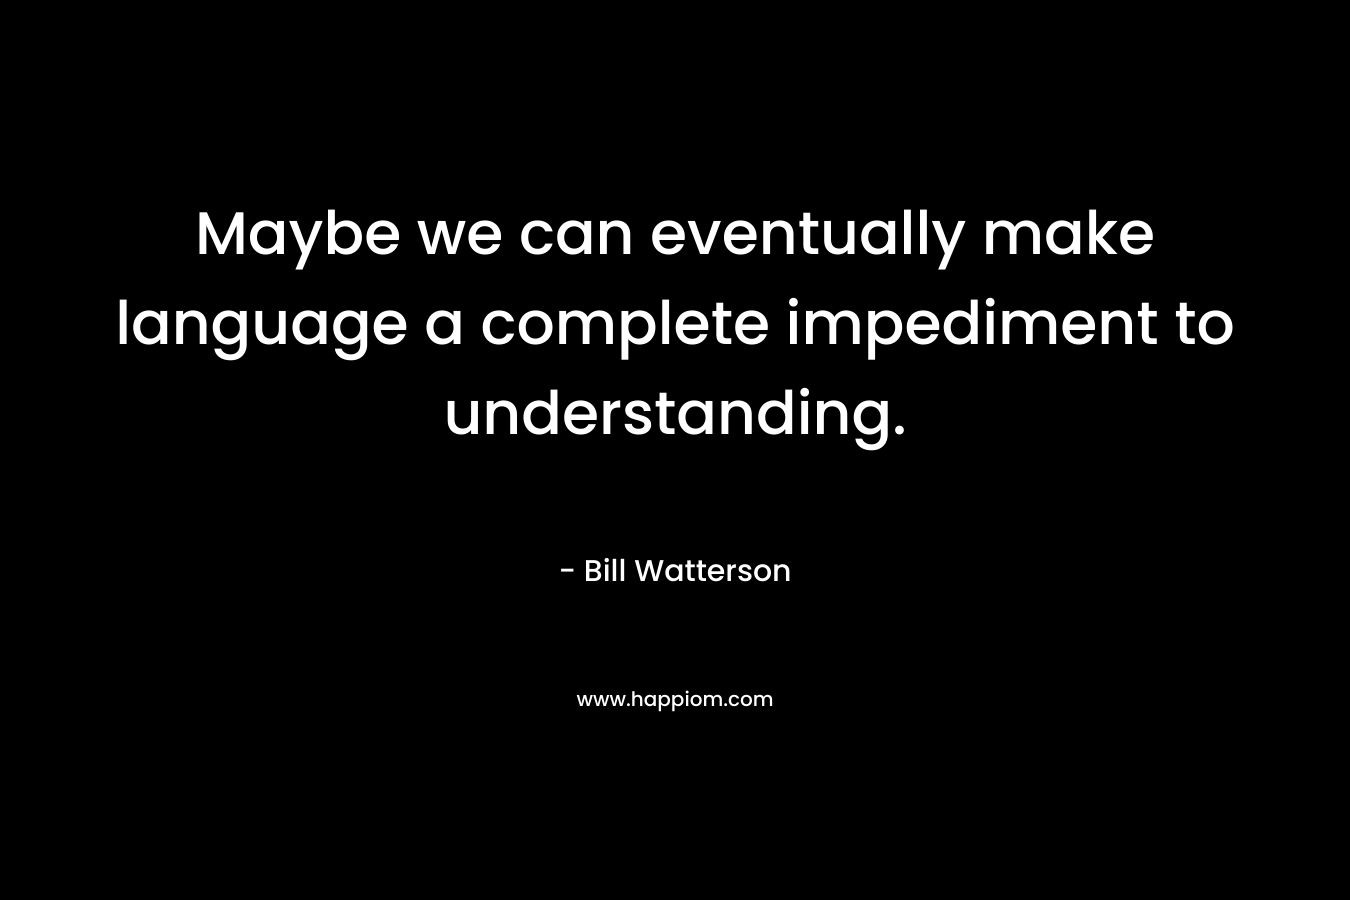 Maybe we can eventually make language a complete impediment to understanding. – Bill Watterson